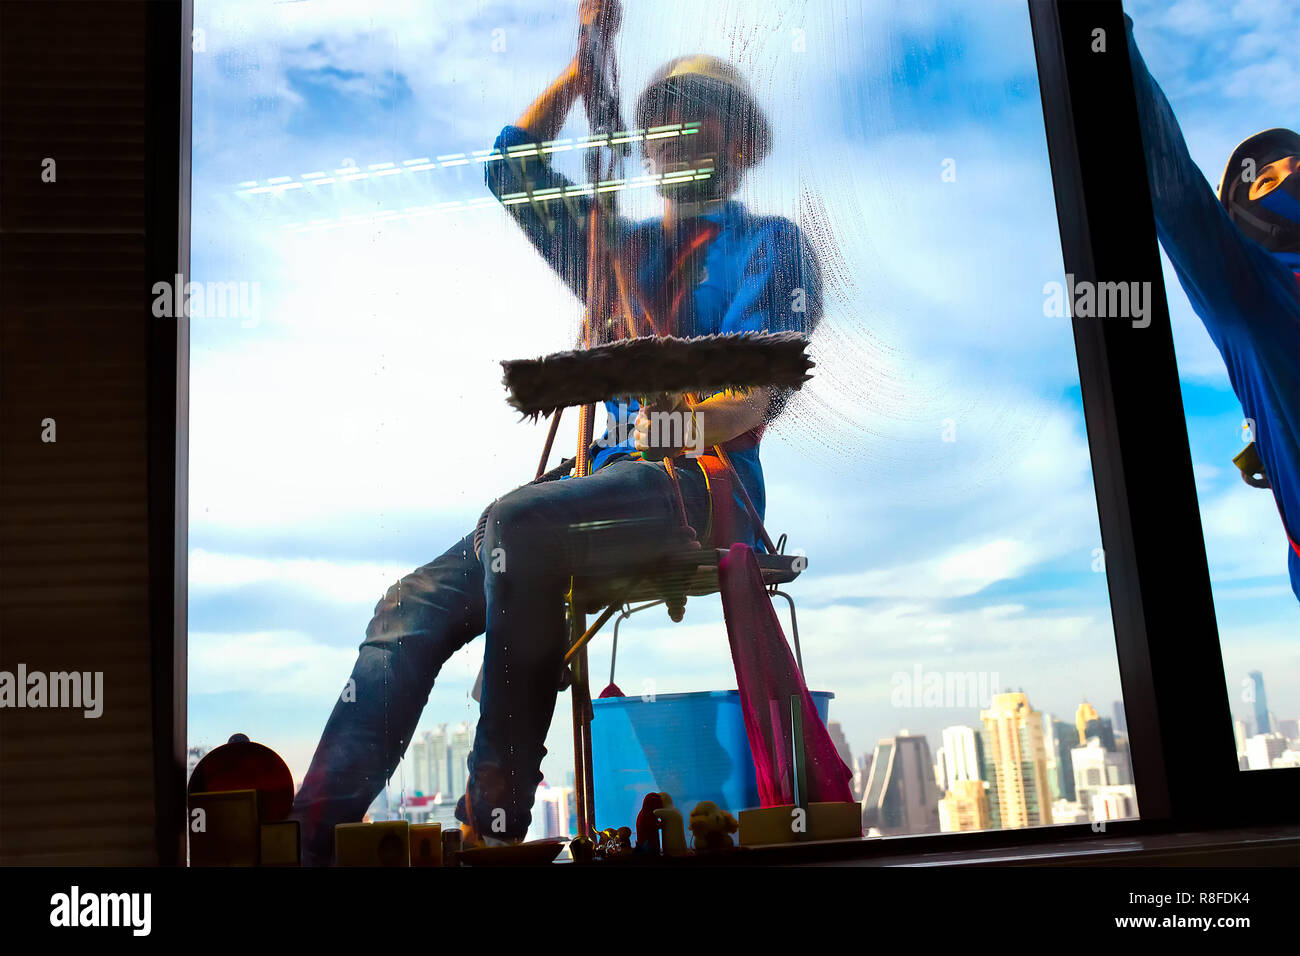 Two window cleaners hanging on ropes, cleaning the windows of a high rise building. Stock Photo